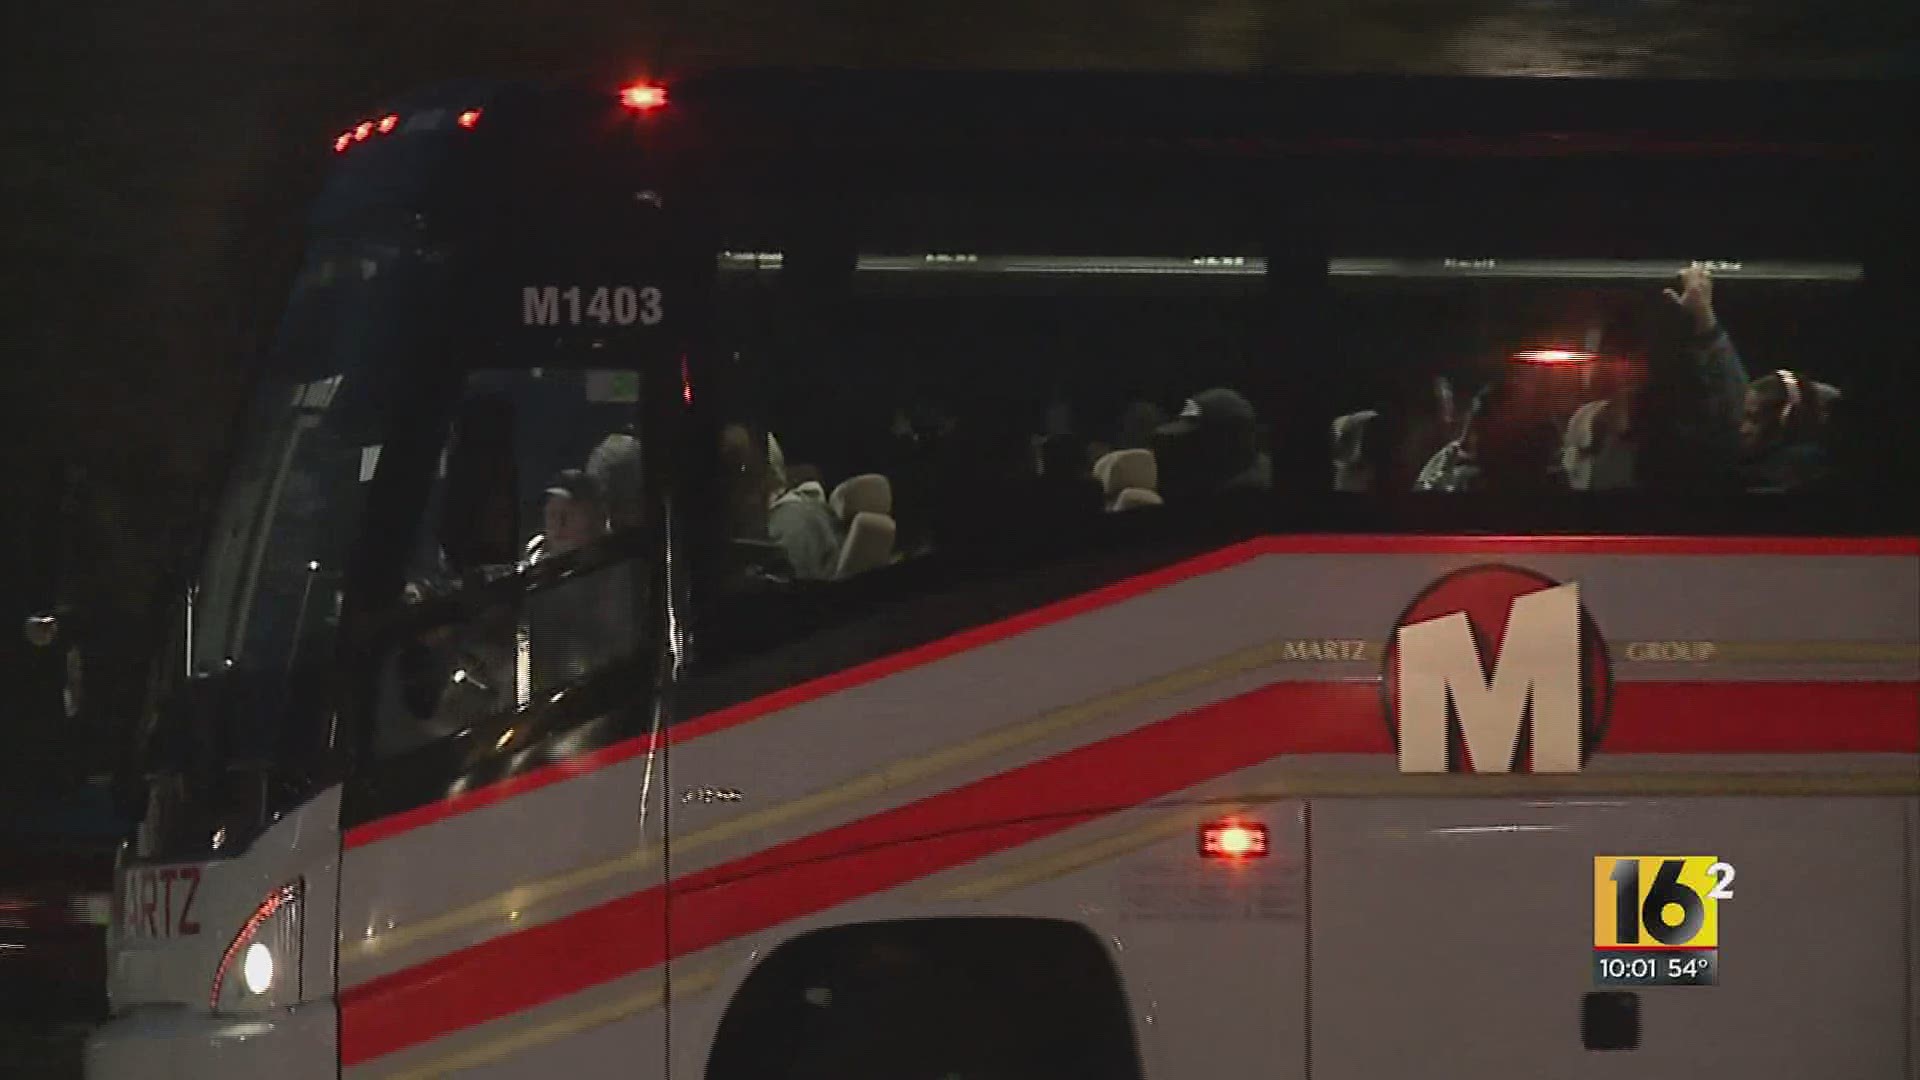 Commuters said they are trying to be mindful of germs while they travel.